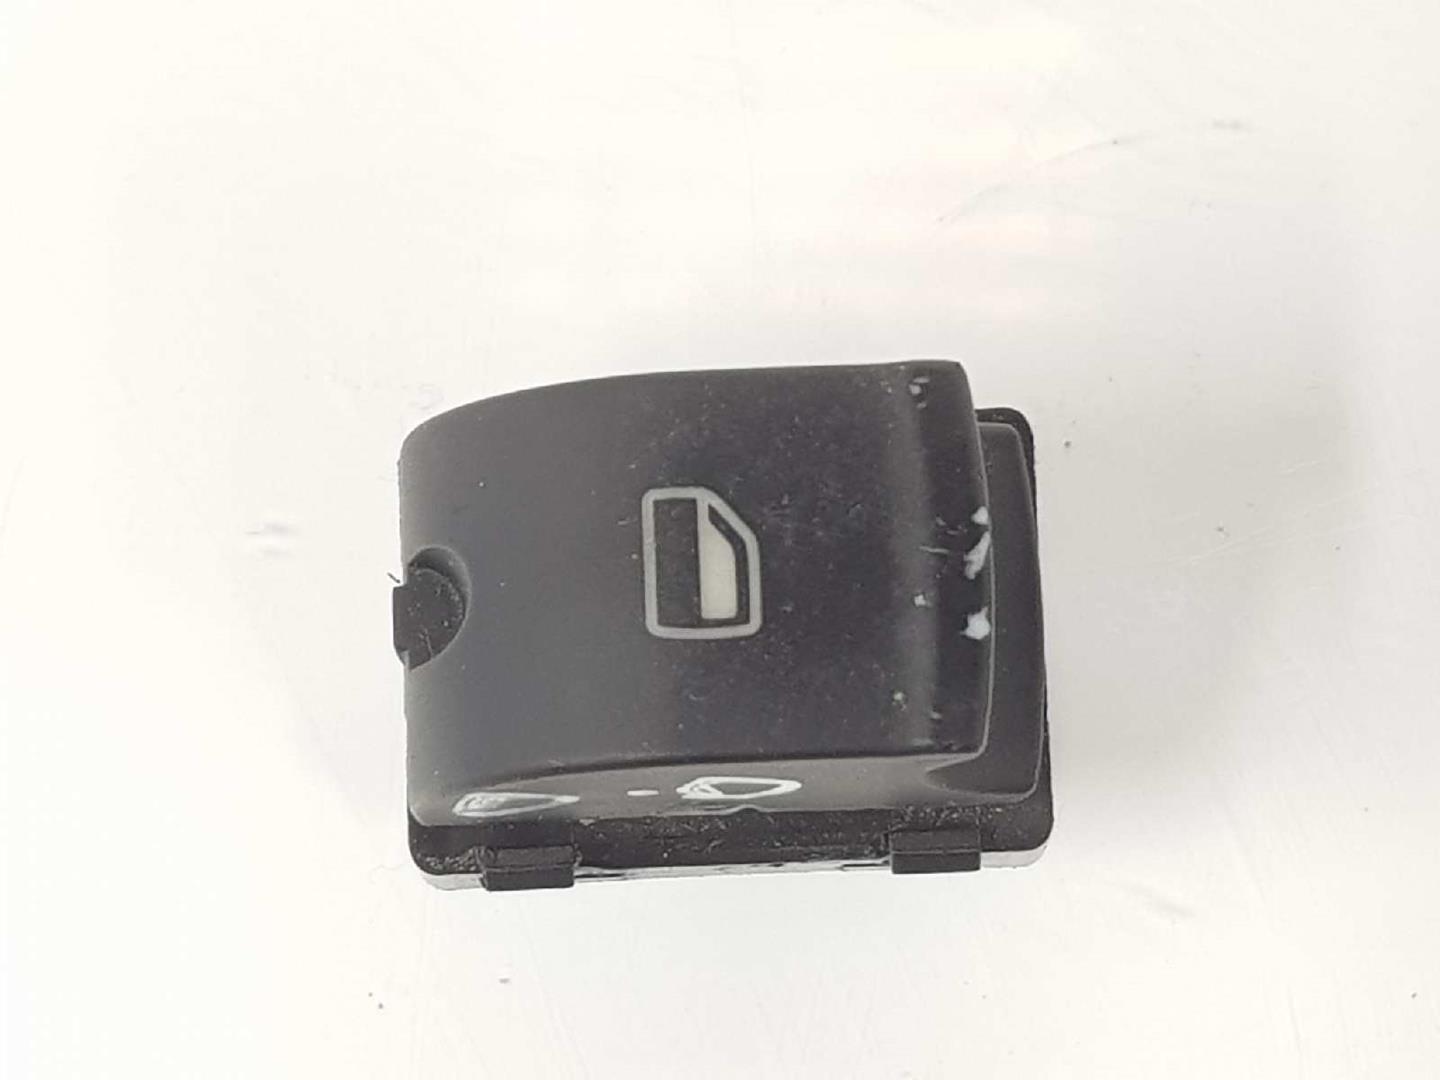 AUDI A3 8P (2003-2013) Front Right Door Window Switch 4F0959855A, 4F0959855A 19699594